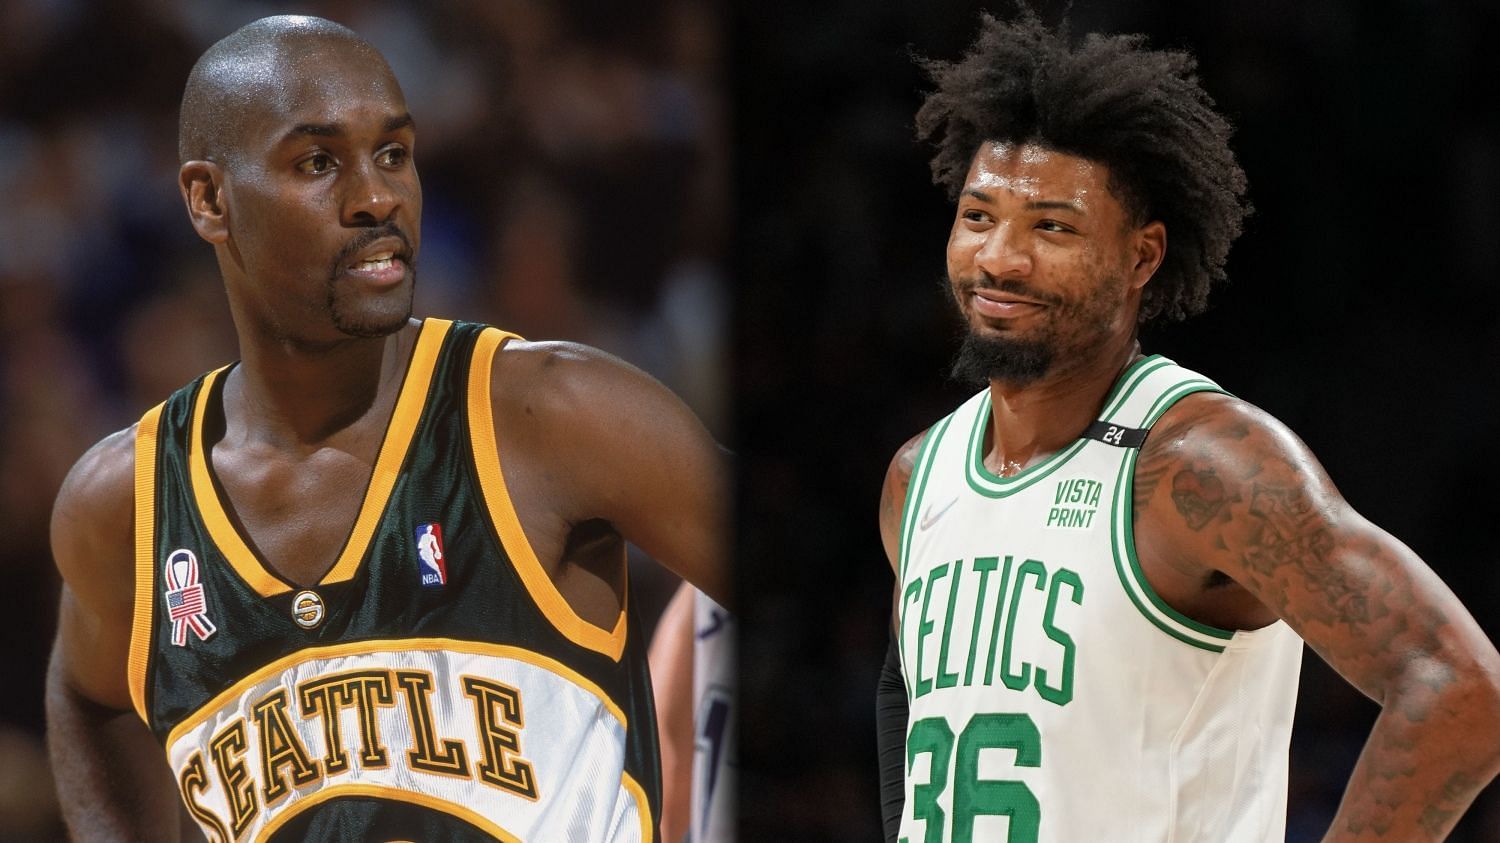 1996 Defensive Player of the Year Gary Payton is endorsing Marcus Smart to become just the second point guard in NBA history to win the DPOY. [Photo: CBS Boston]